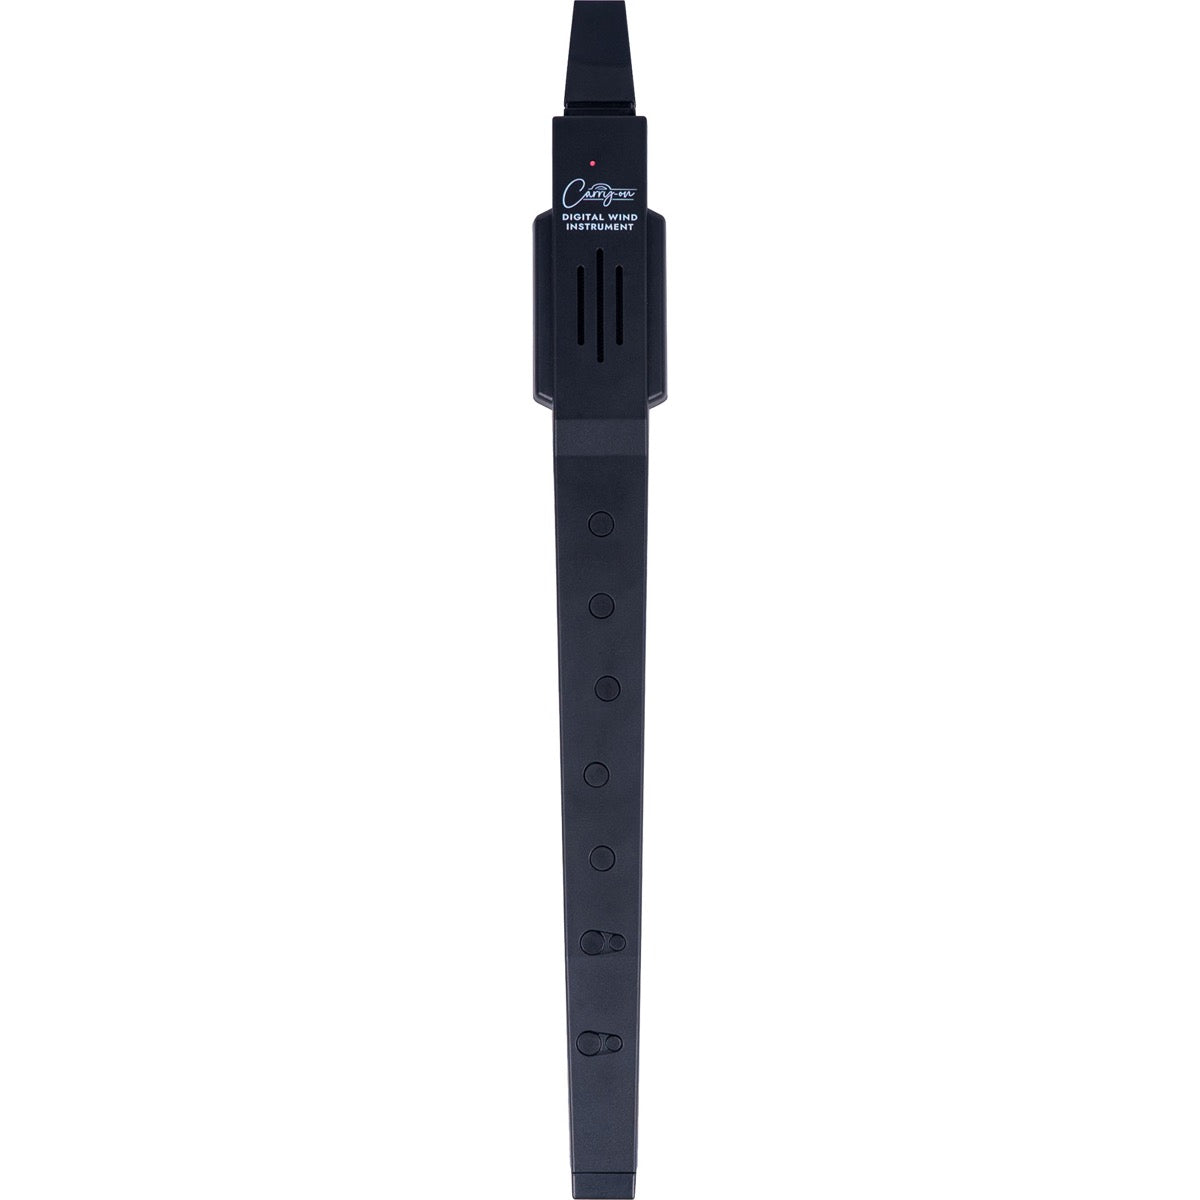 Carry-On Digital Wind Instrument - Black View 3